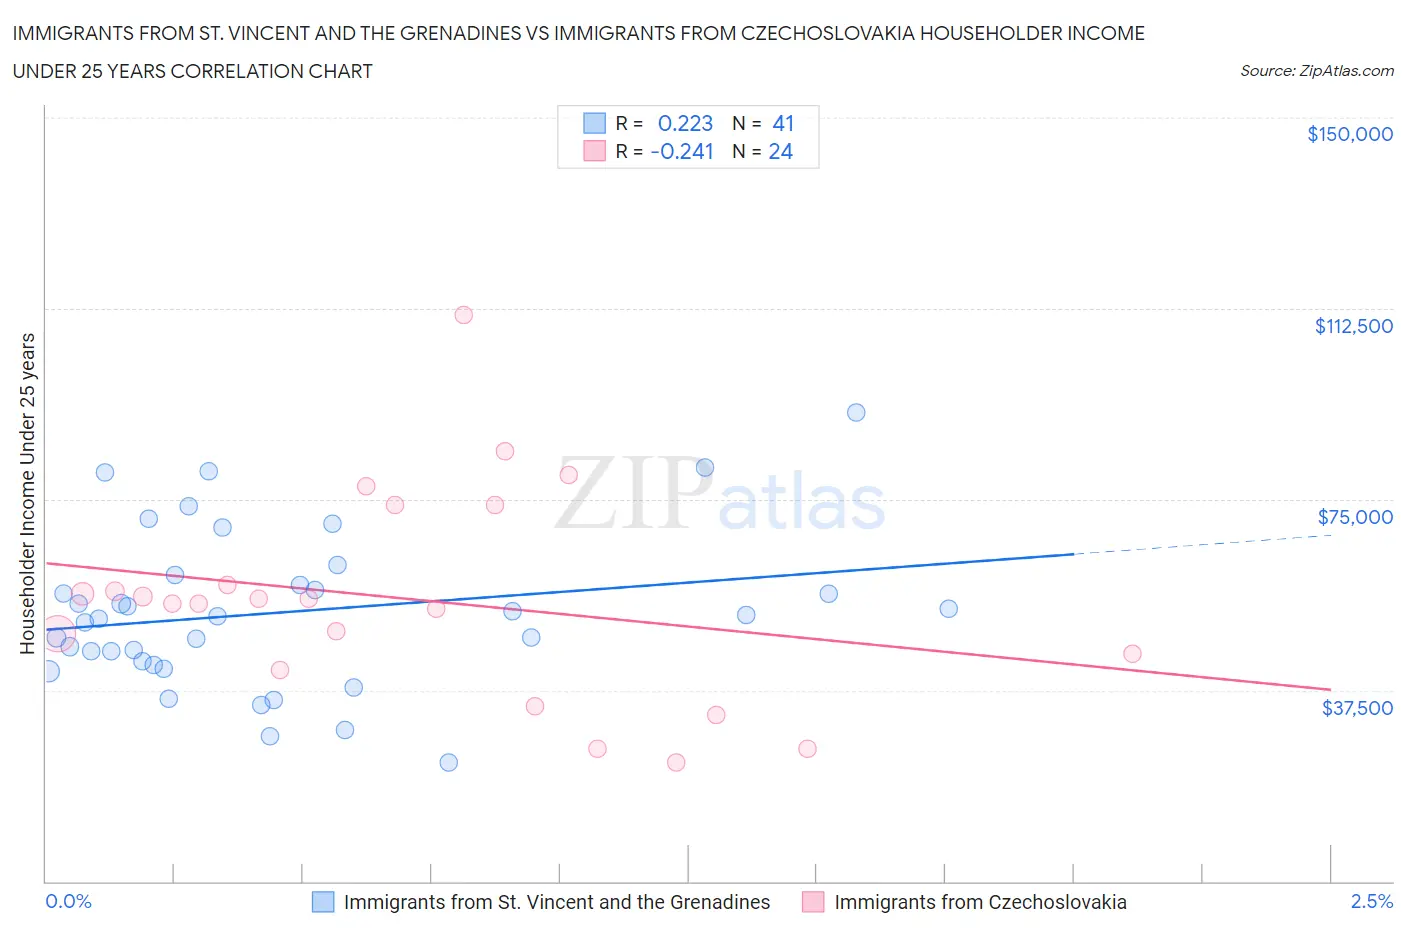 Immigrants from St. Vincent and the Grenadines vs Immigrants from Czechoslovakia Householder Income Under 25 years